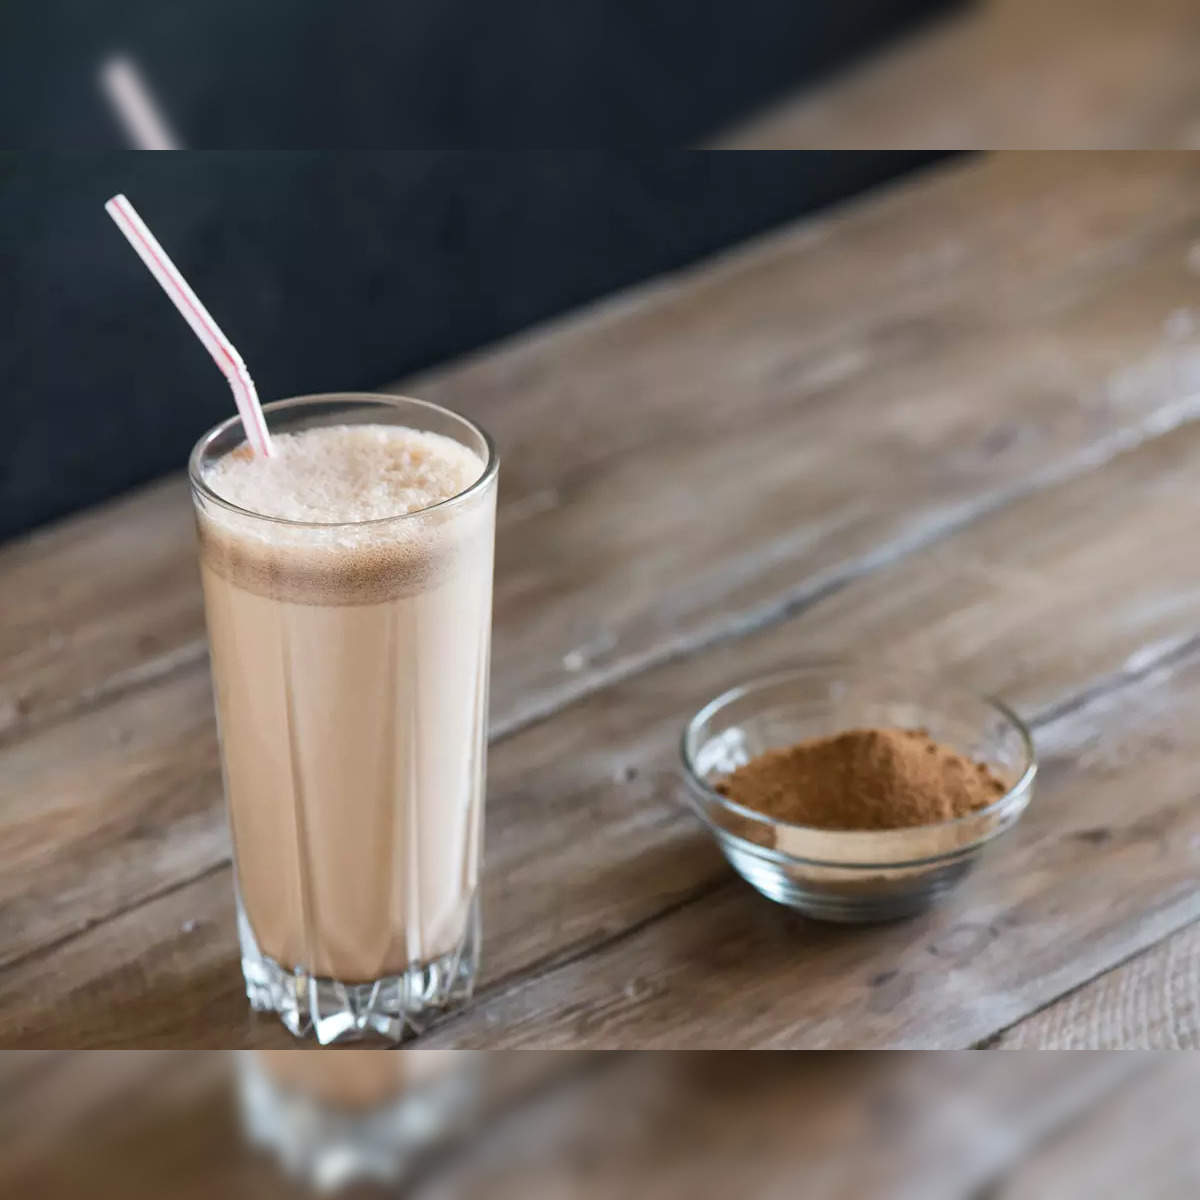 malted milk drinks: Within controversy lies an opportunity for malted milk  drinks to reinvent themselves - The Economic Times